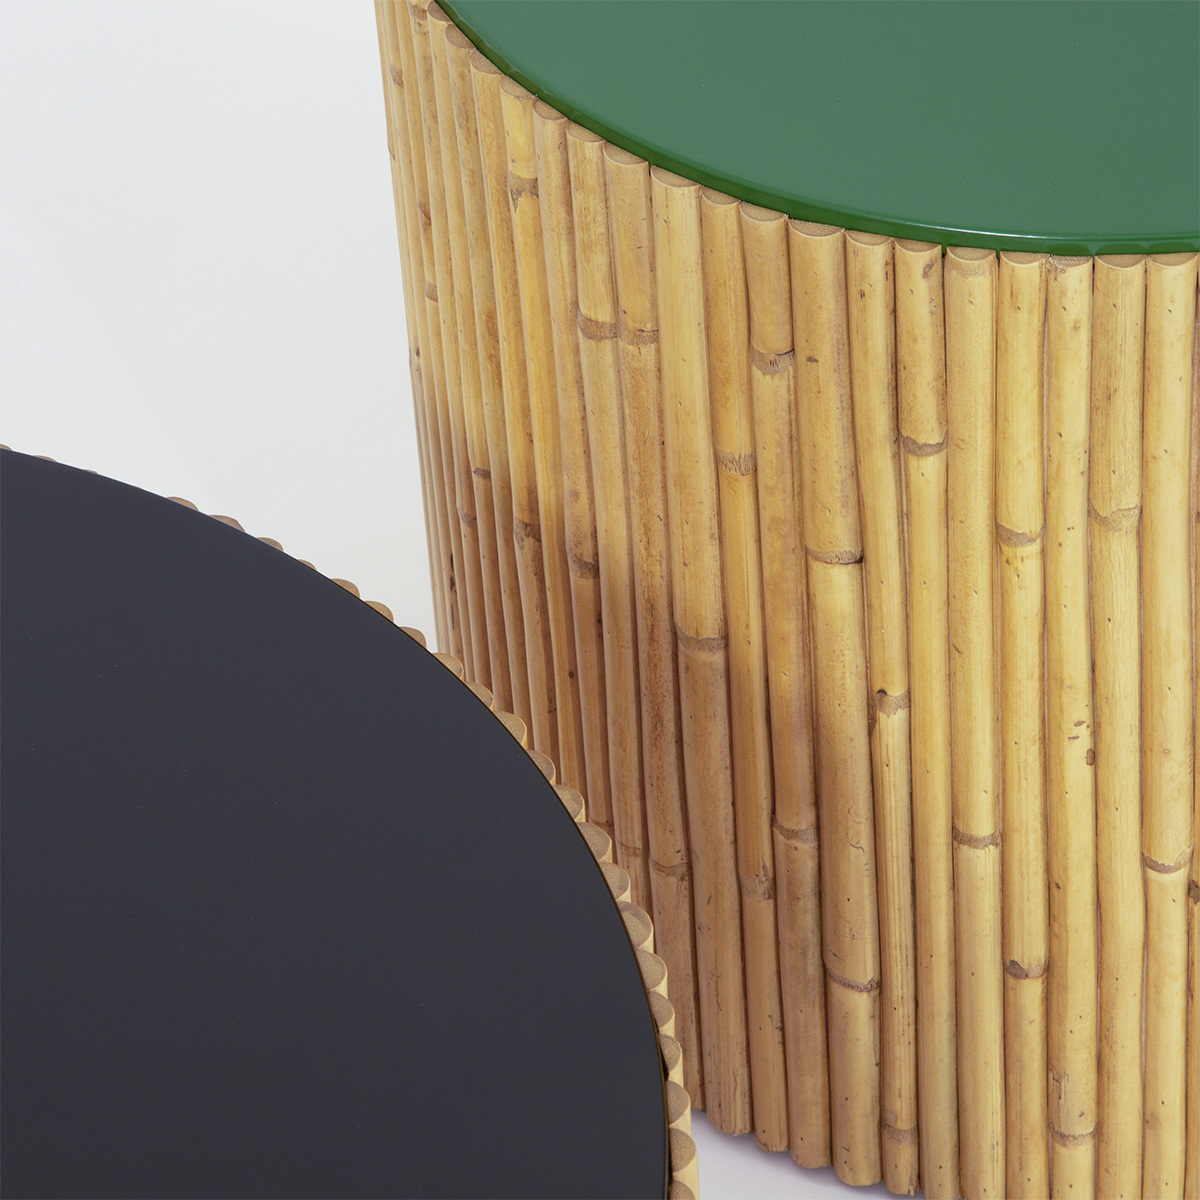 Duo of Coffee Tables Rivera, Natural / Black - ø60 x H30 cm and ø45 x H40 cm - Rattan / Lacquered wood - image 7